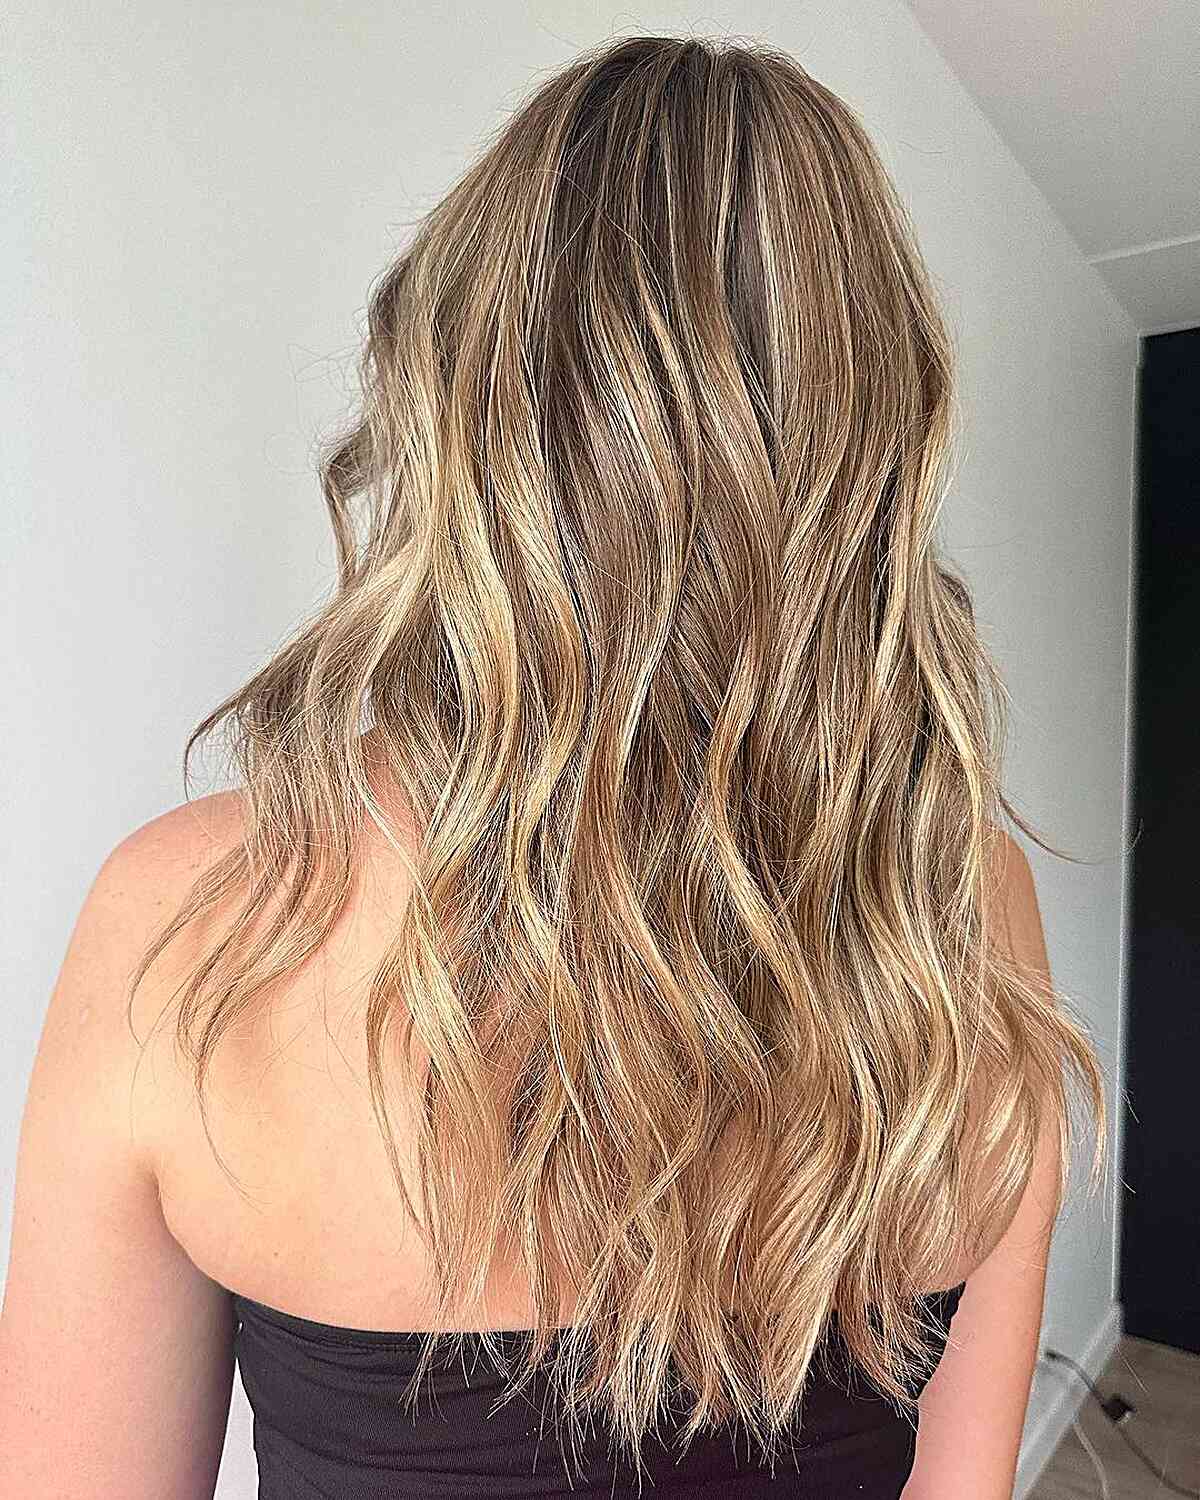 Root Melt Balayage with Honey Blonde Highlighted Hues for Longer Locks